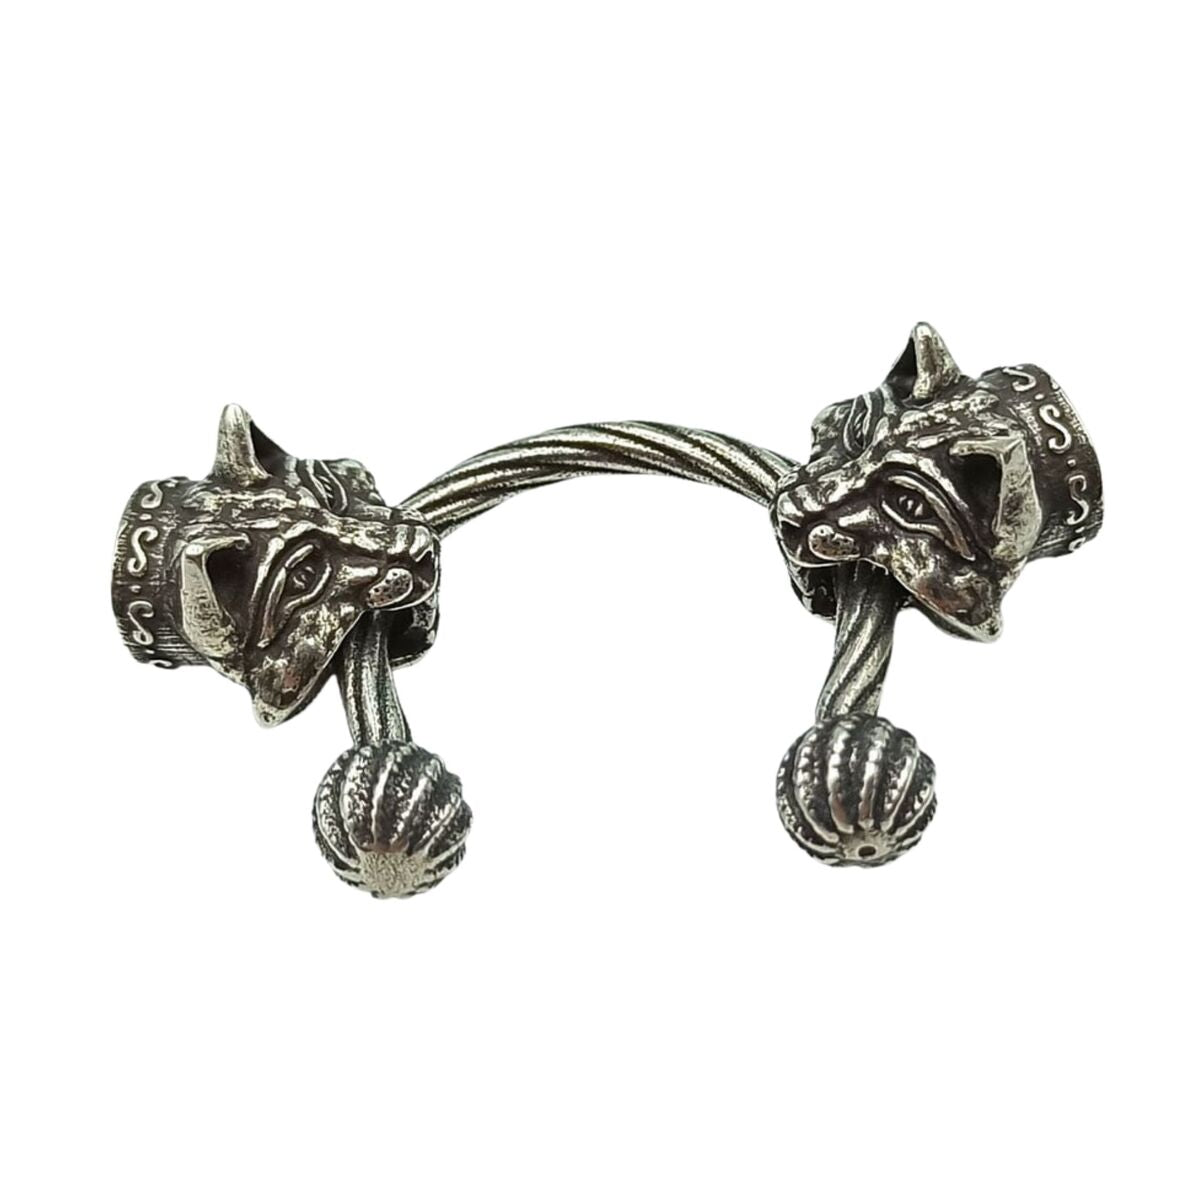 Lynx necklace clasp from silver